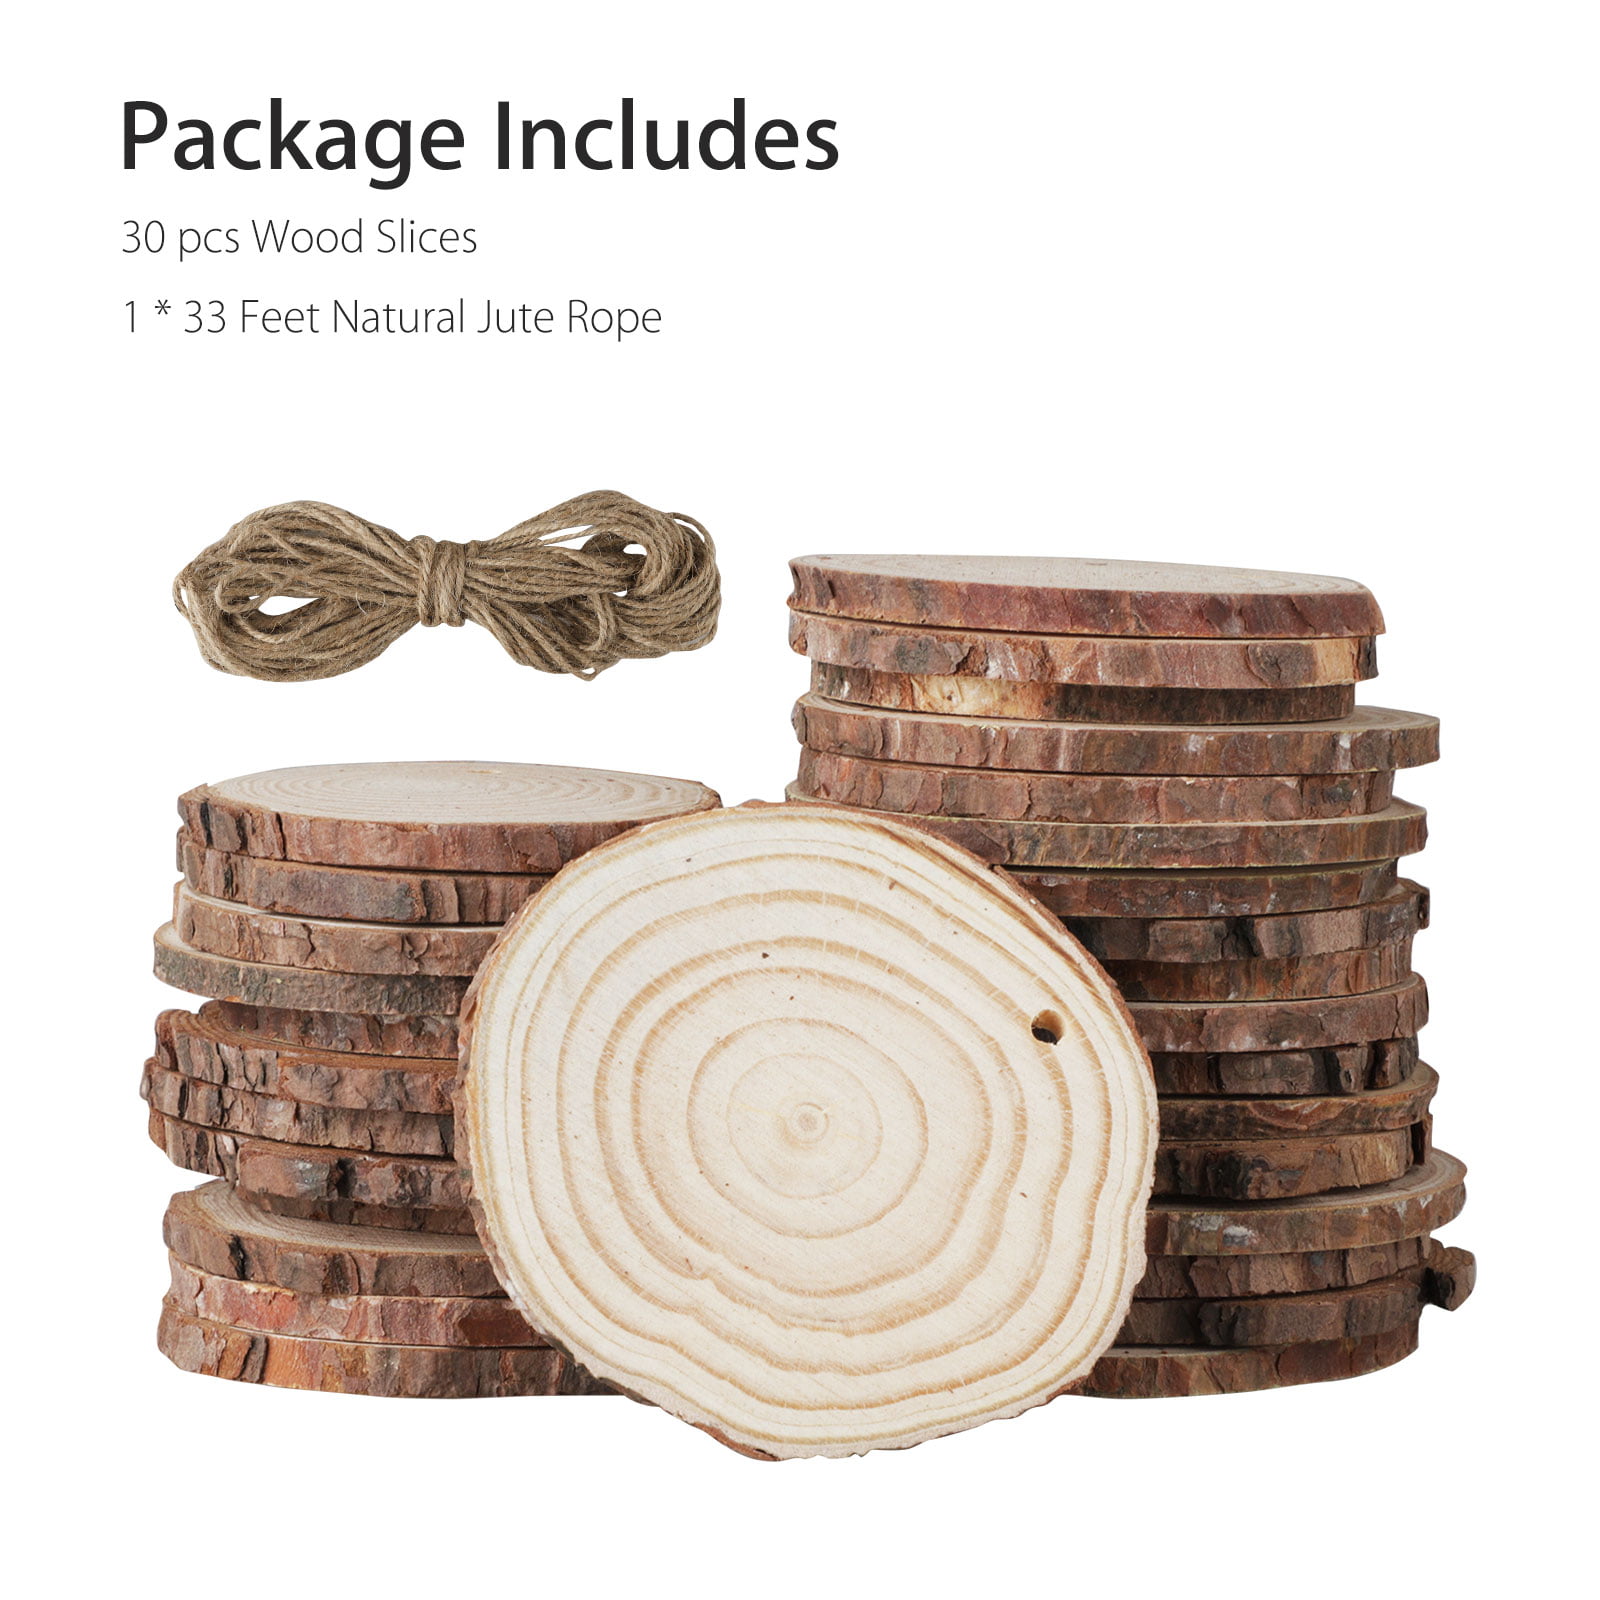 50 Pcs Natural Wood Slices Unfinished Predrilled Round Discs Hole Wooden Circles with 40 Feet Natural Jute Twine 2.4-2.8 for Arts,Crafts,Christmas,Rustic Wedding Ornaments,DIY Crafts and Gift Tags 